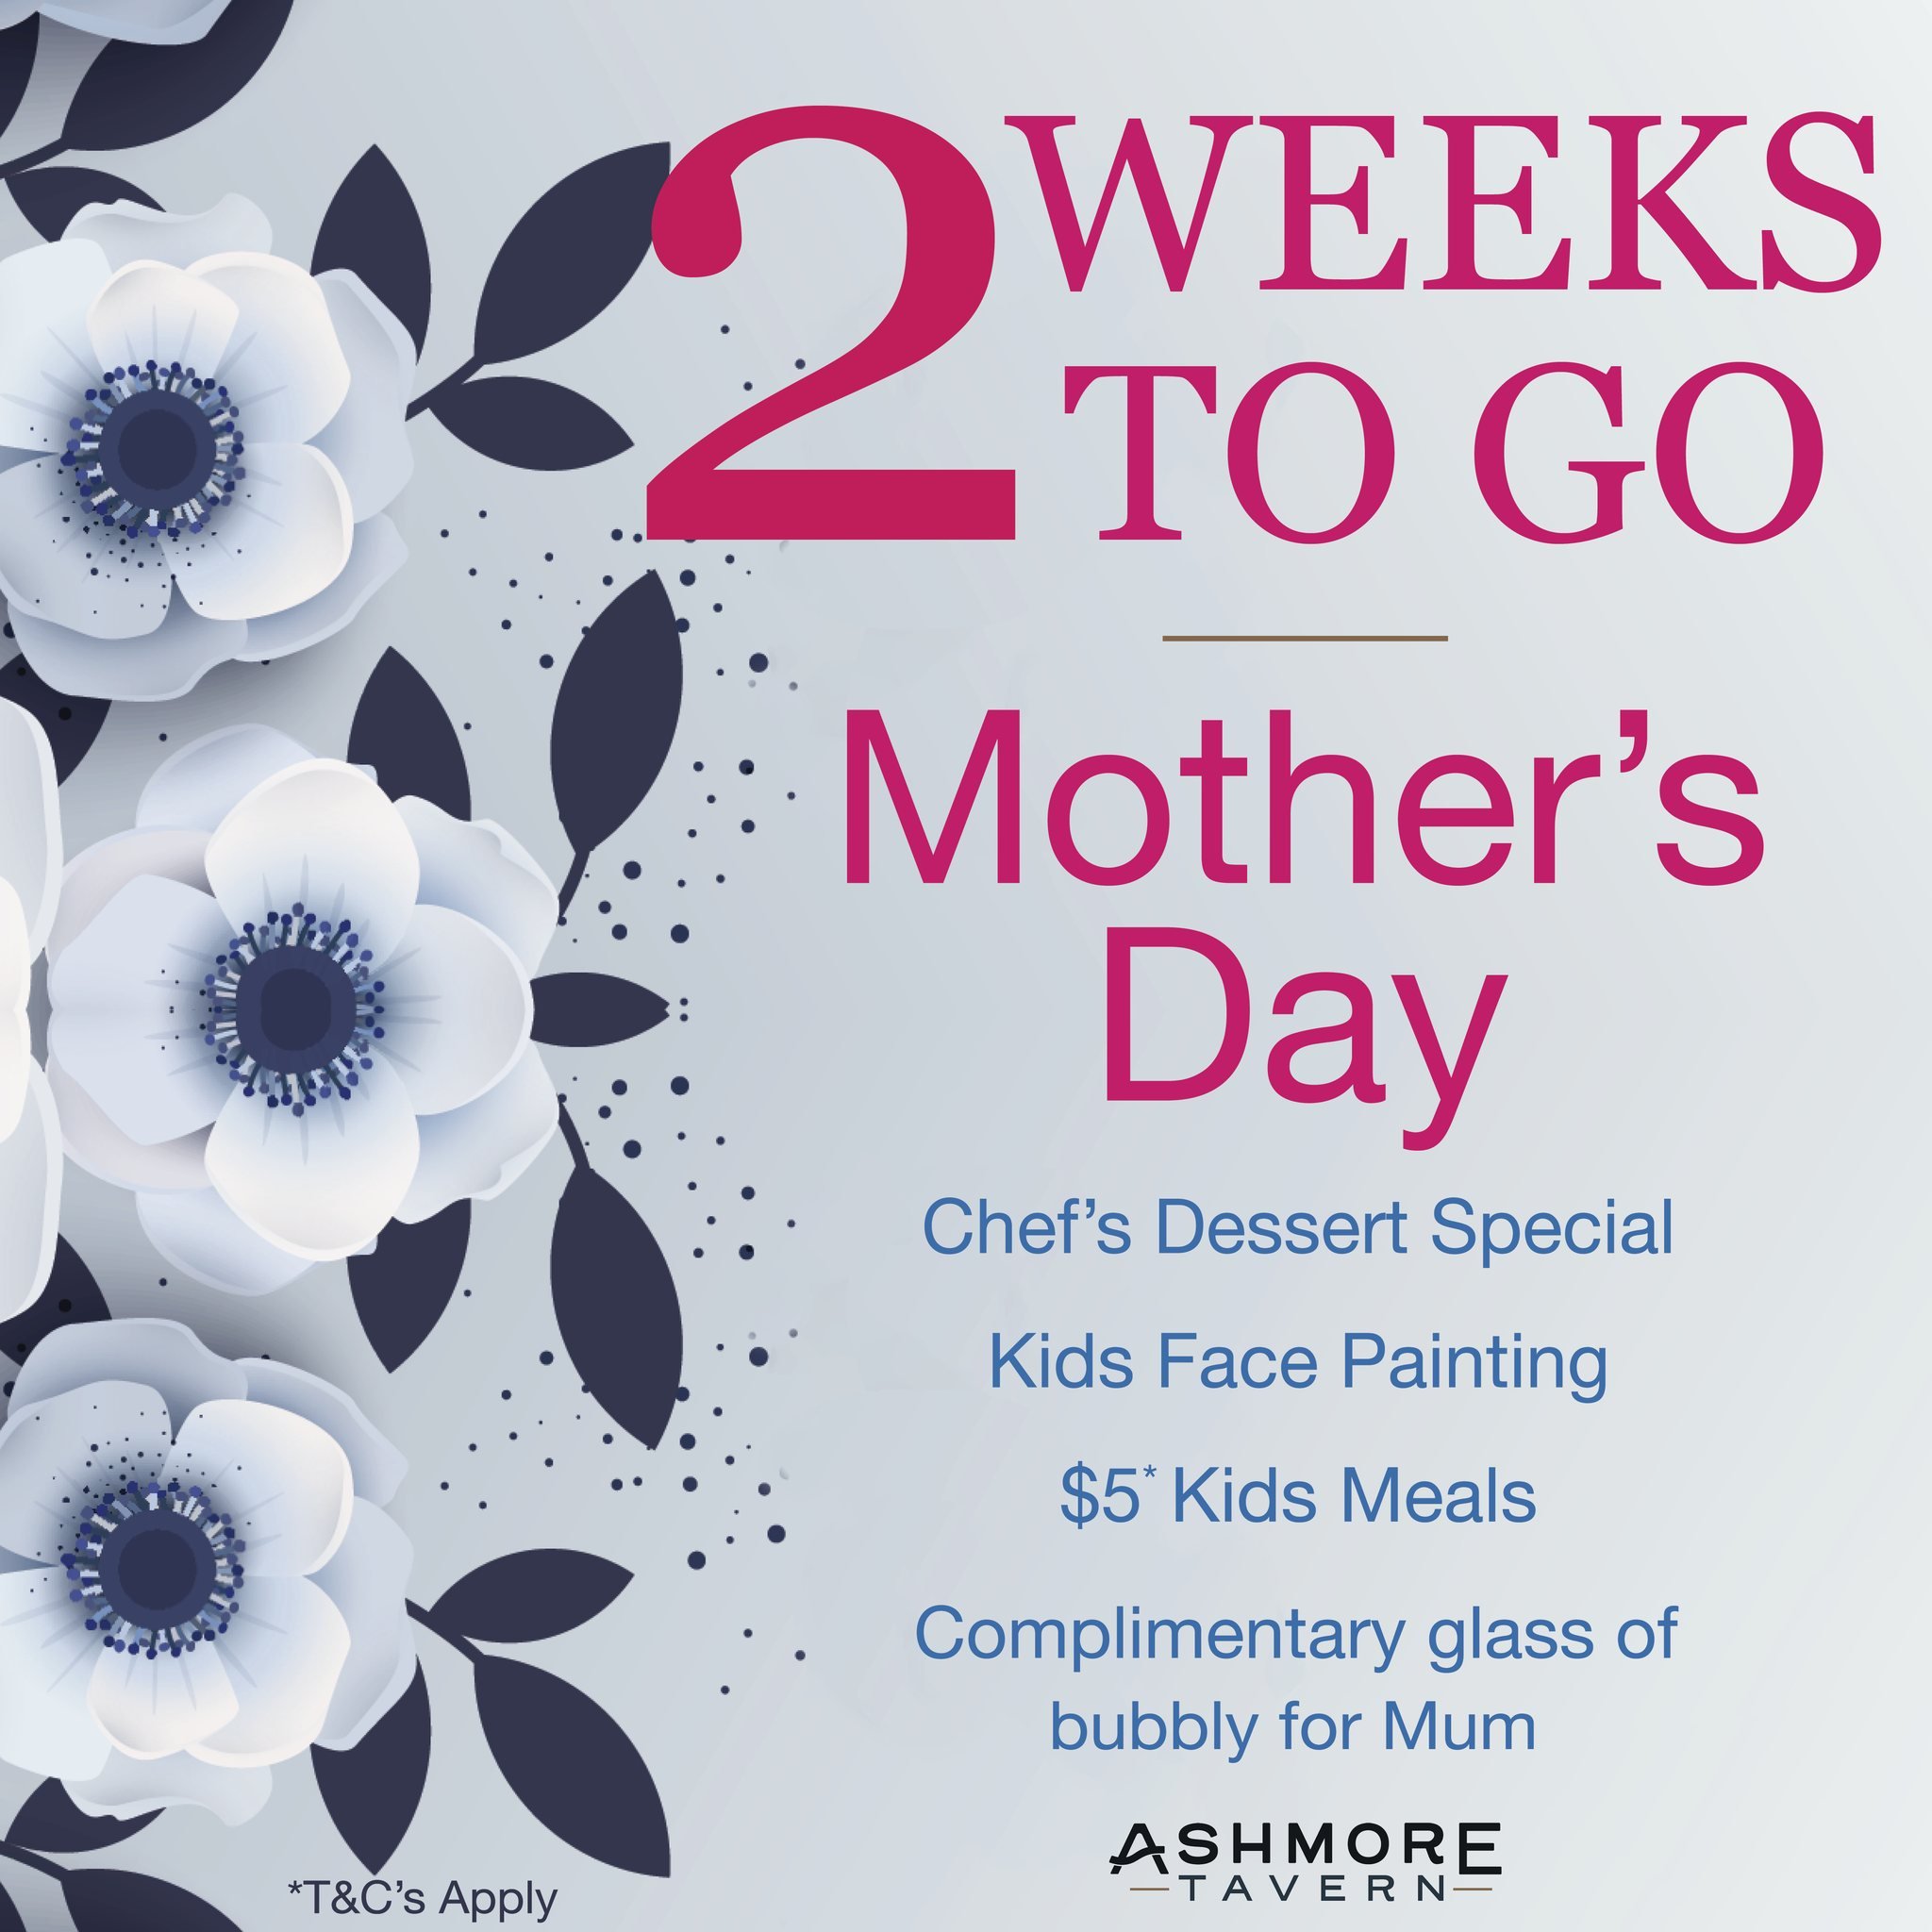 Only 2 weeks left until Mother's Day! 💐

Treat Mum to a special day at Ashmore Tavern with our chef&rsquo;s dessert special, kids face painting, $5* kids meals, and a complimentary glass of bubbly for Mum 🍰🥂

Book your table now with the link in o